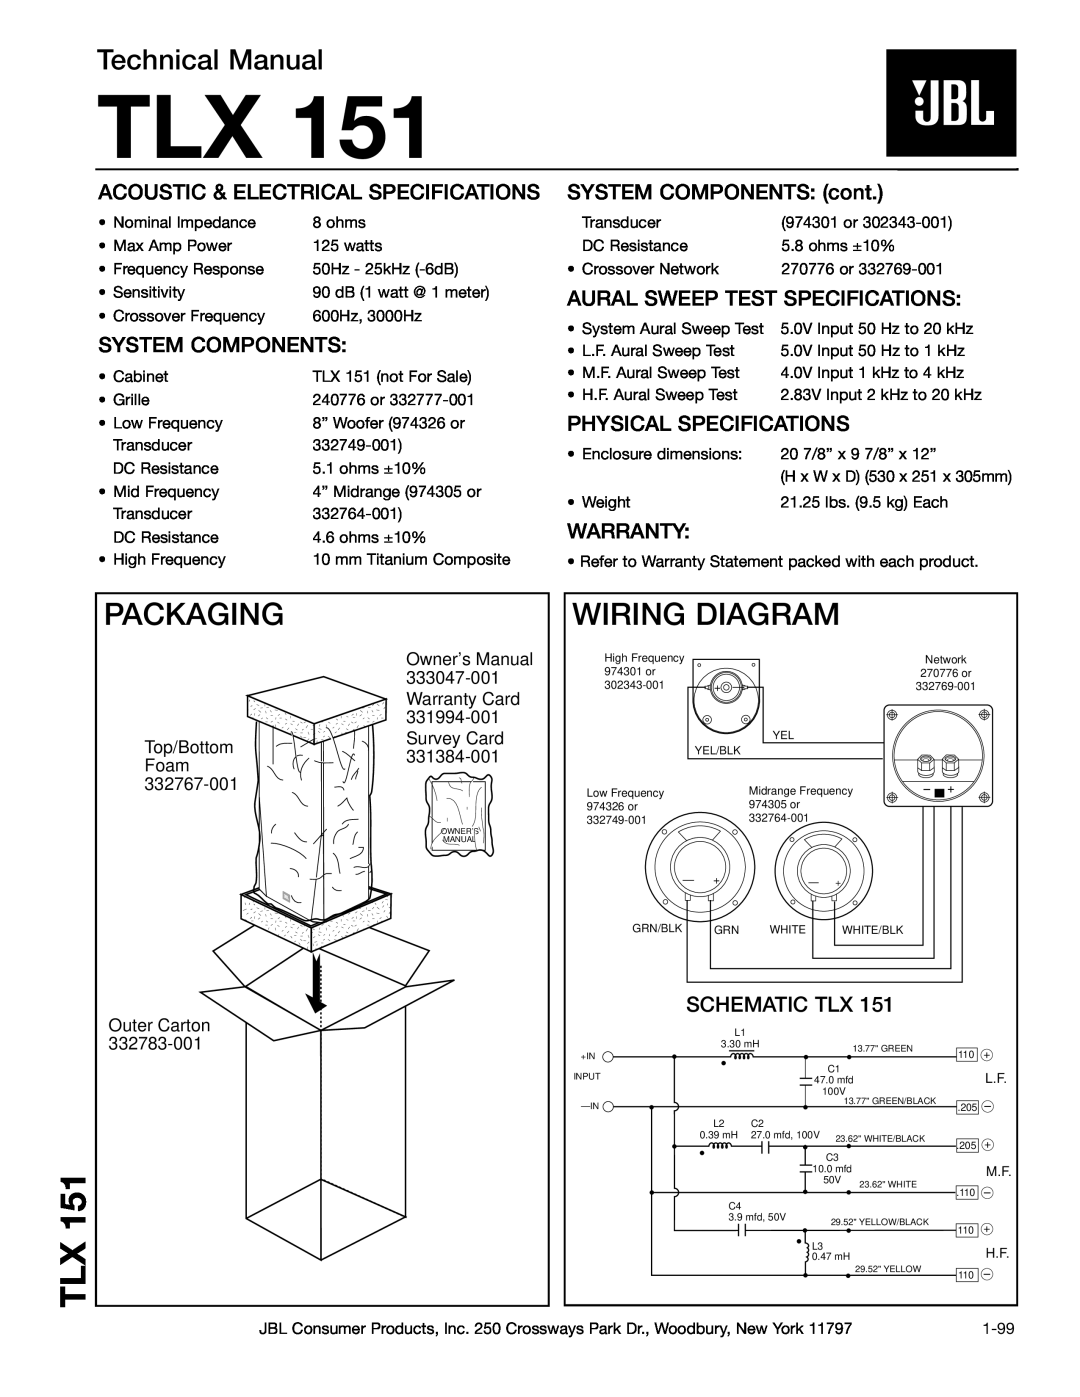 JBL TLX151 technical manual Packaging, Wiring Diagram, Technical Manual, Acoustic & Electrical Specifications, Warranty 